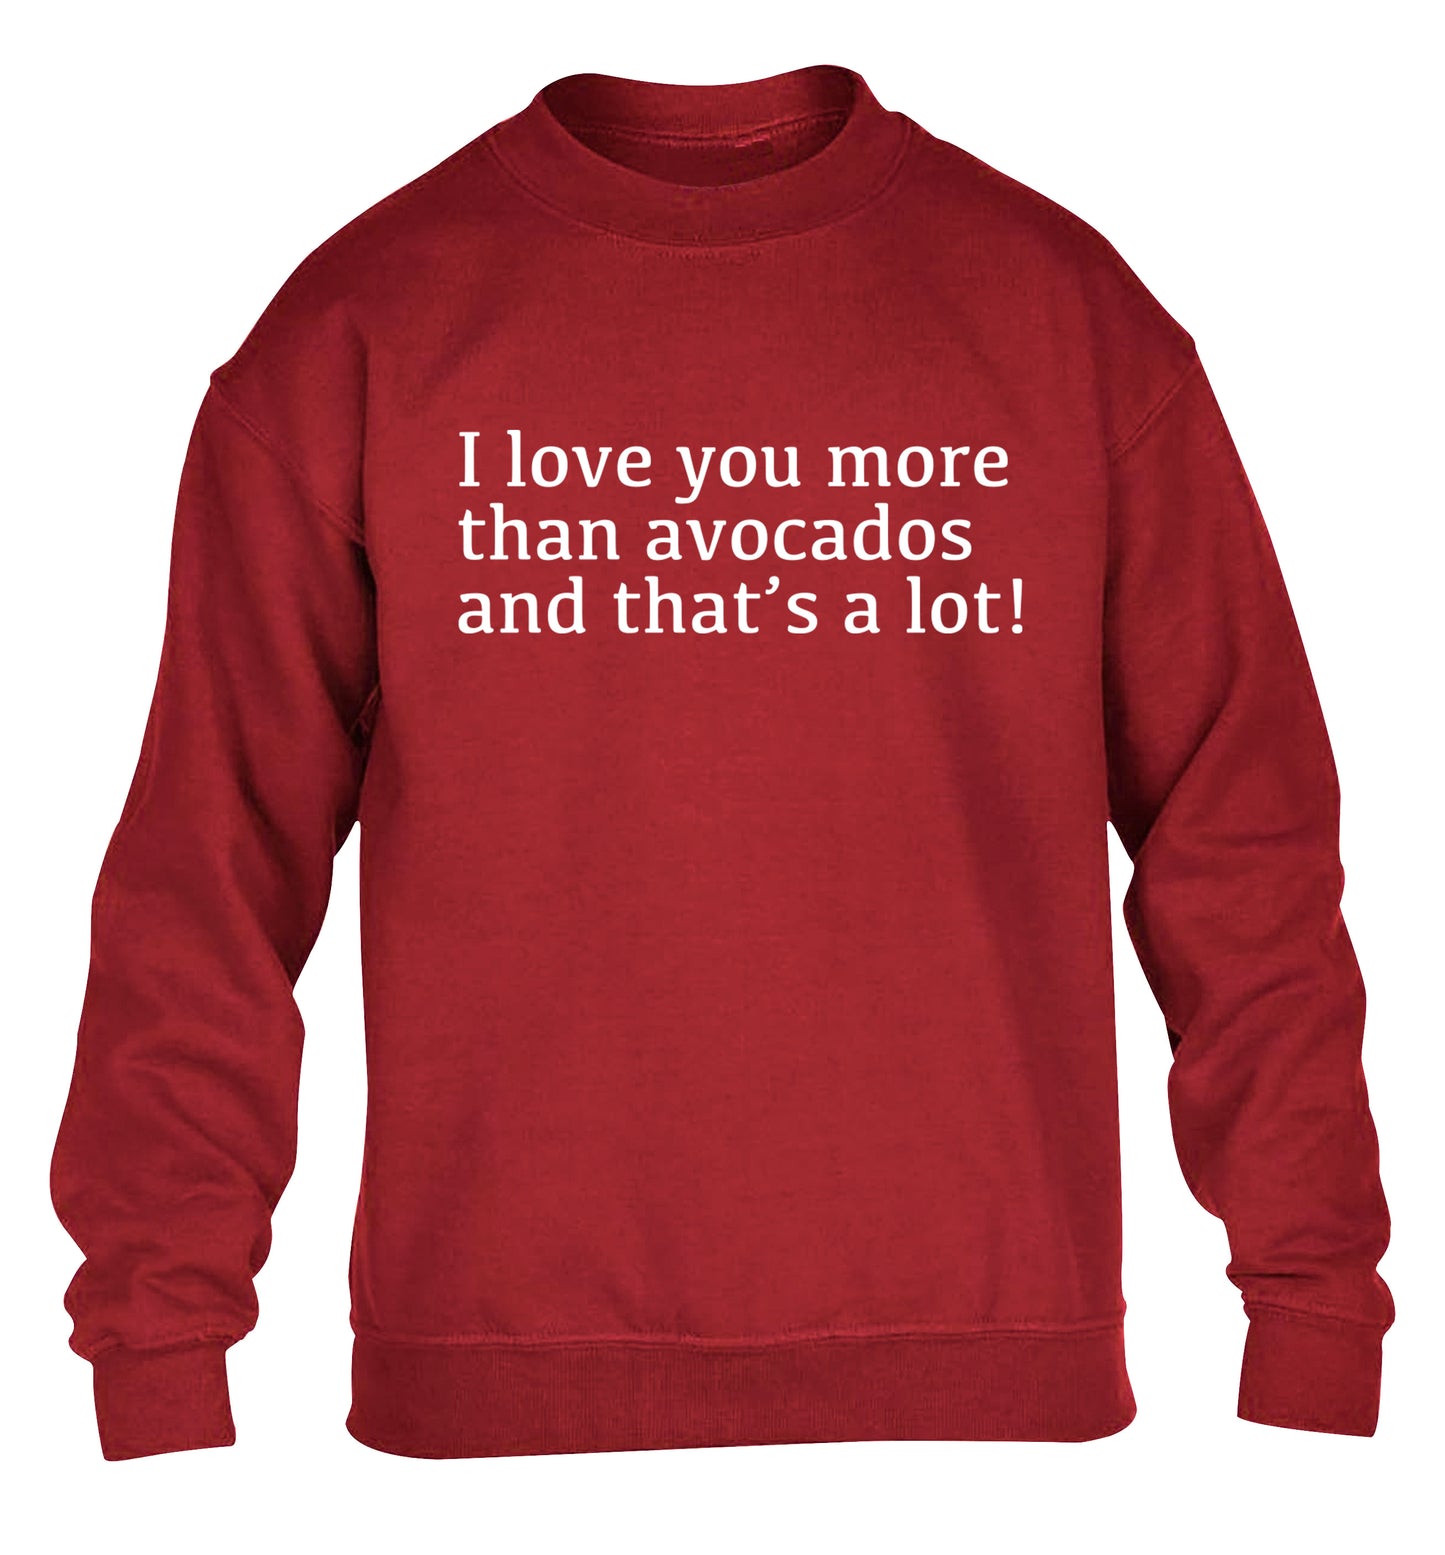 I love you more than avocados and that's a lot children's grey sweater 12-14 Years